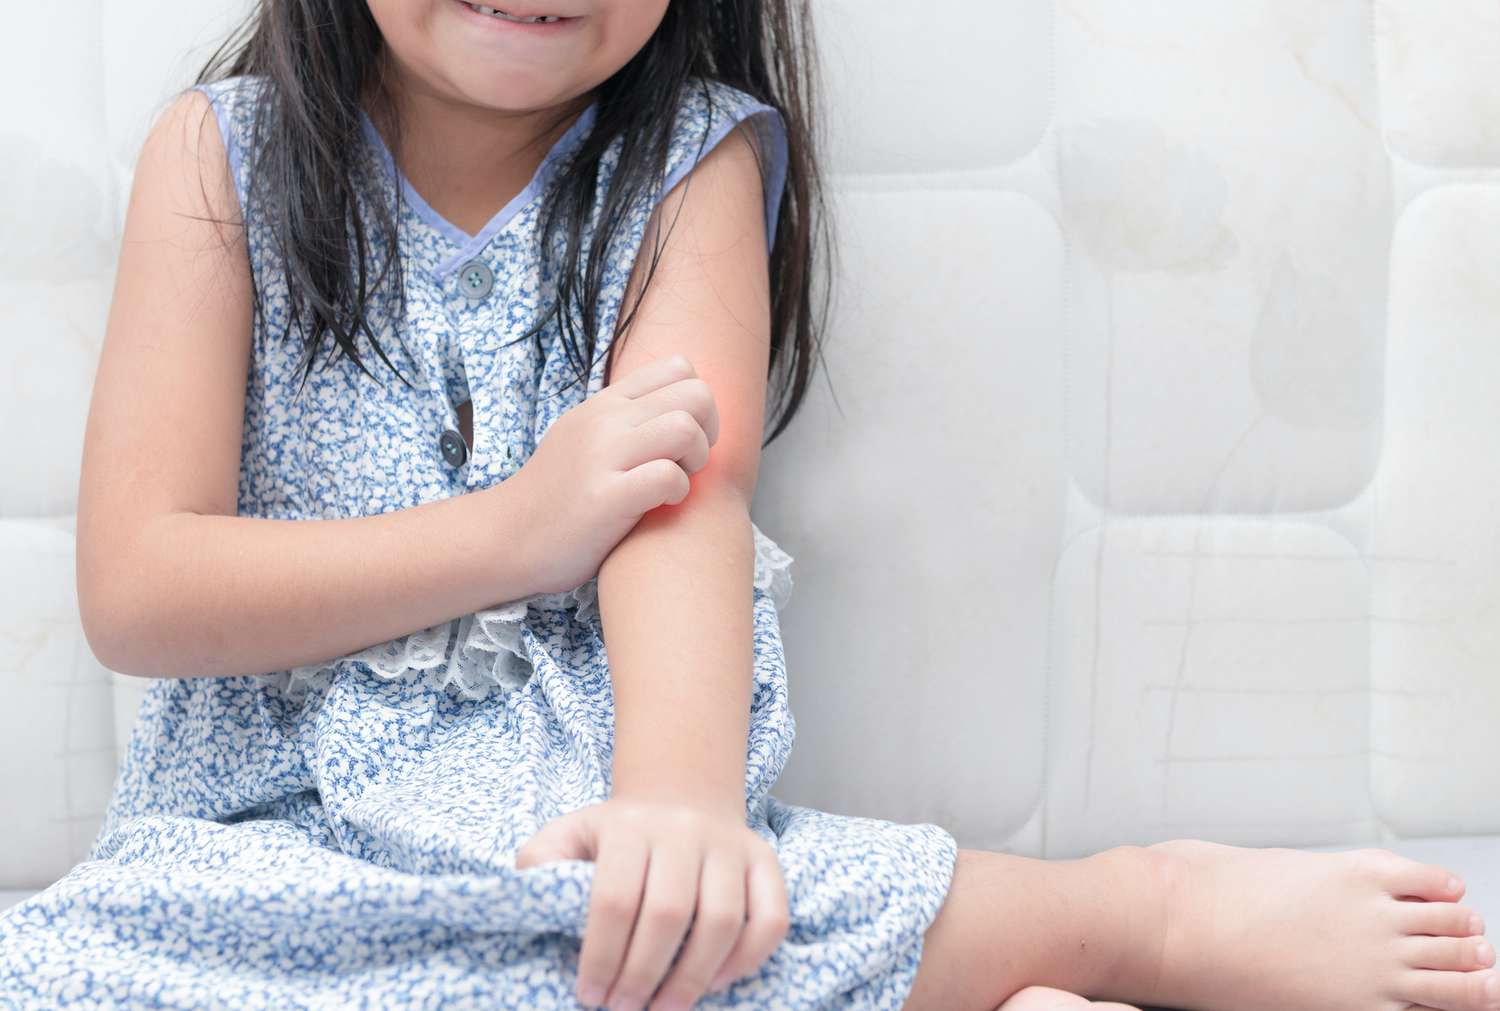 Skin Rashes In Children Learn The Most Common Causes Parents